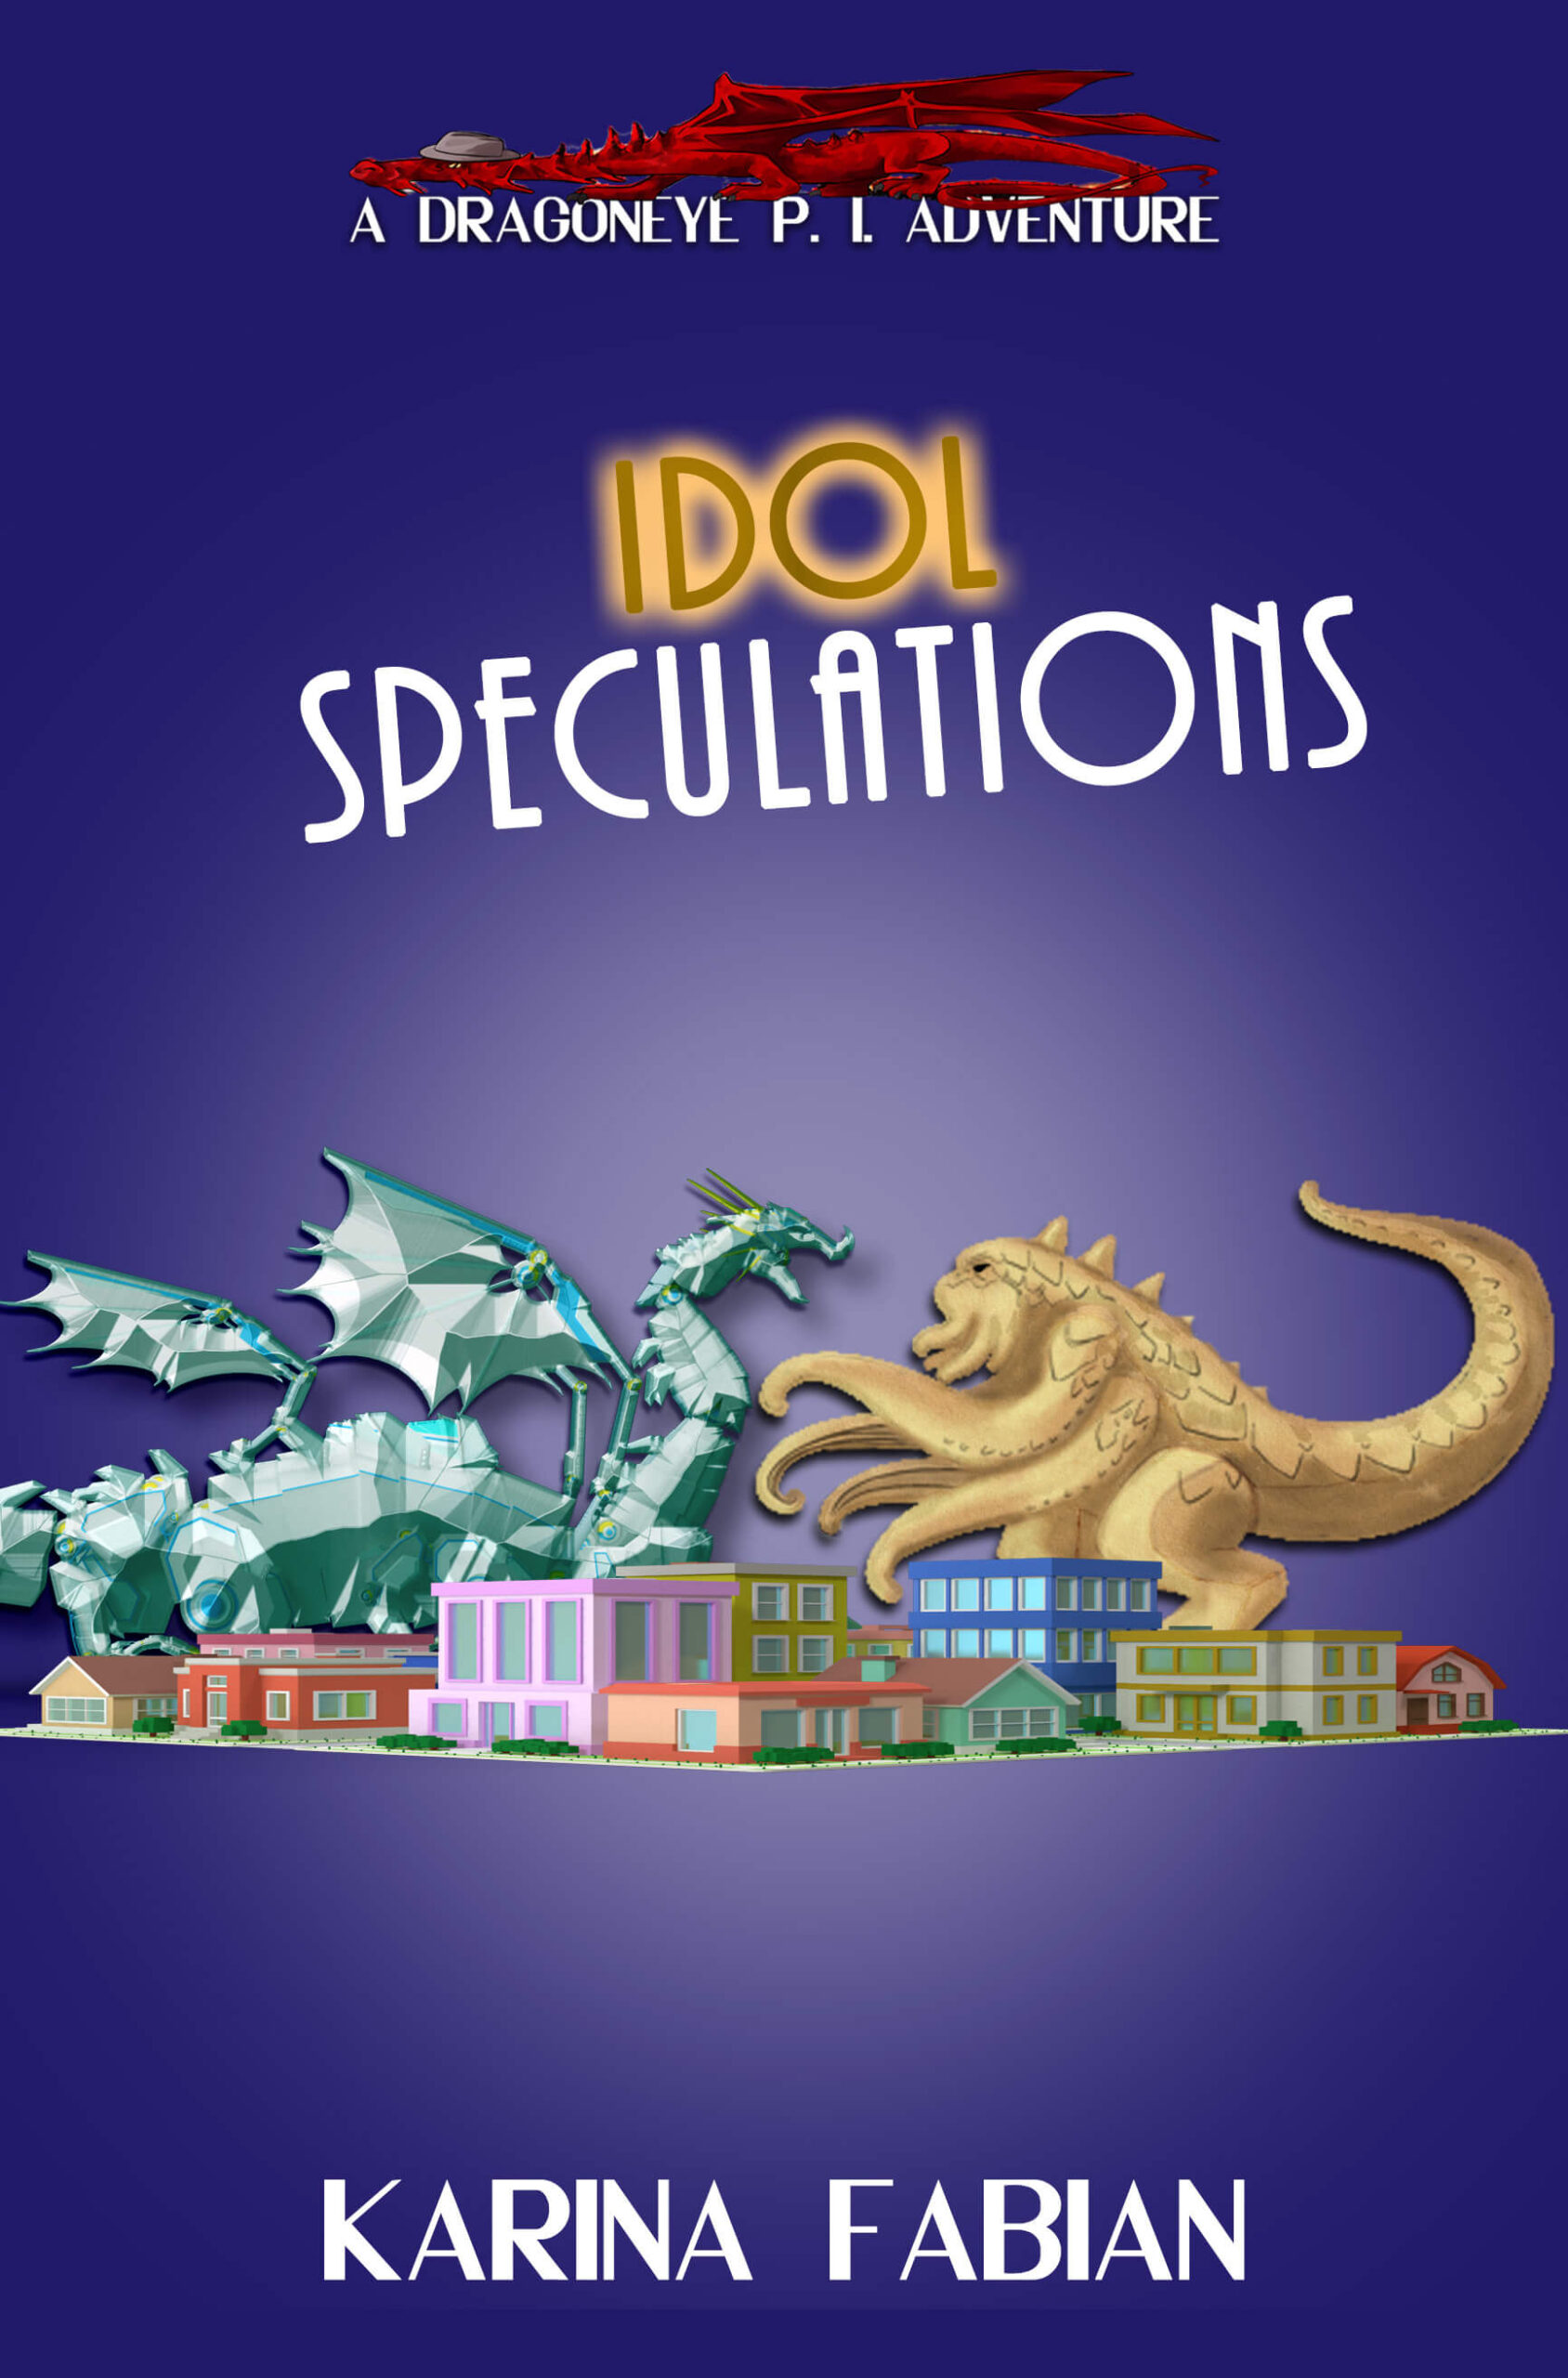 cover art for idol speculations by Karina Fabian